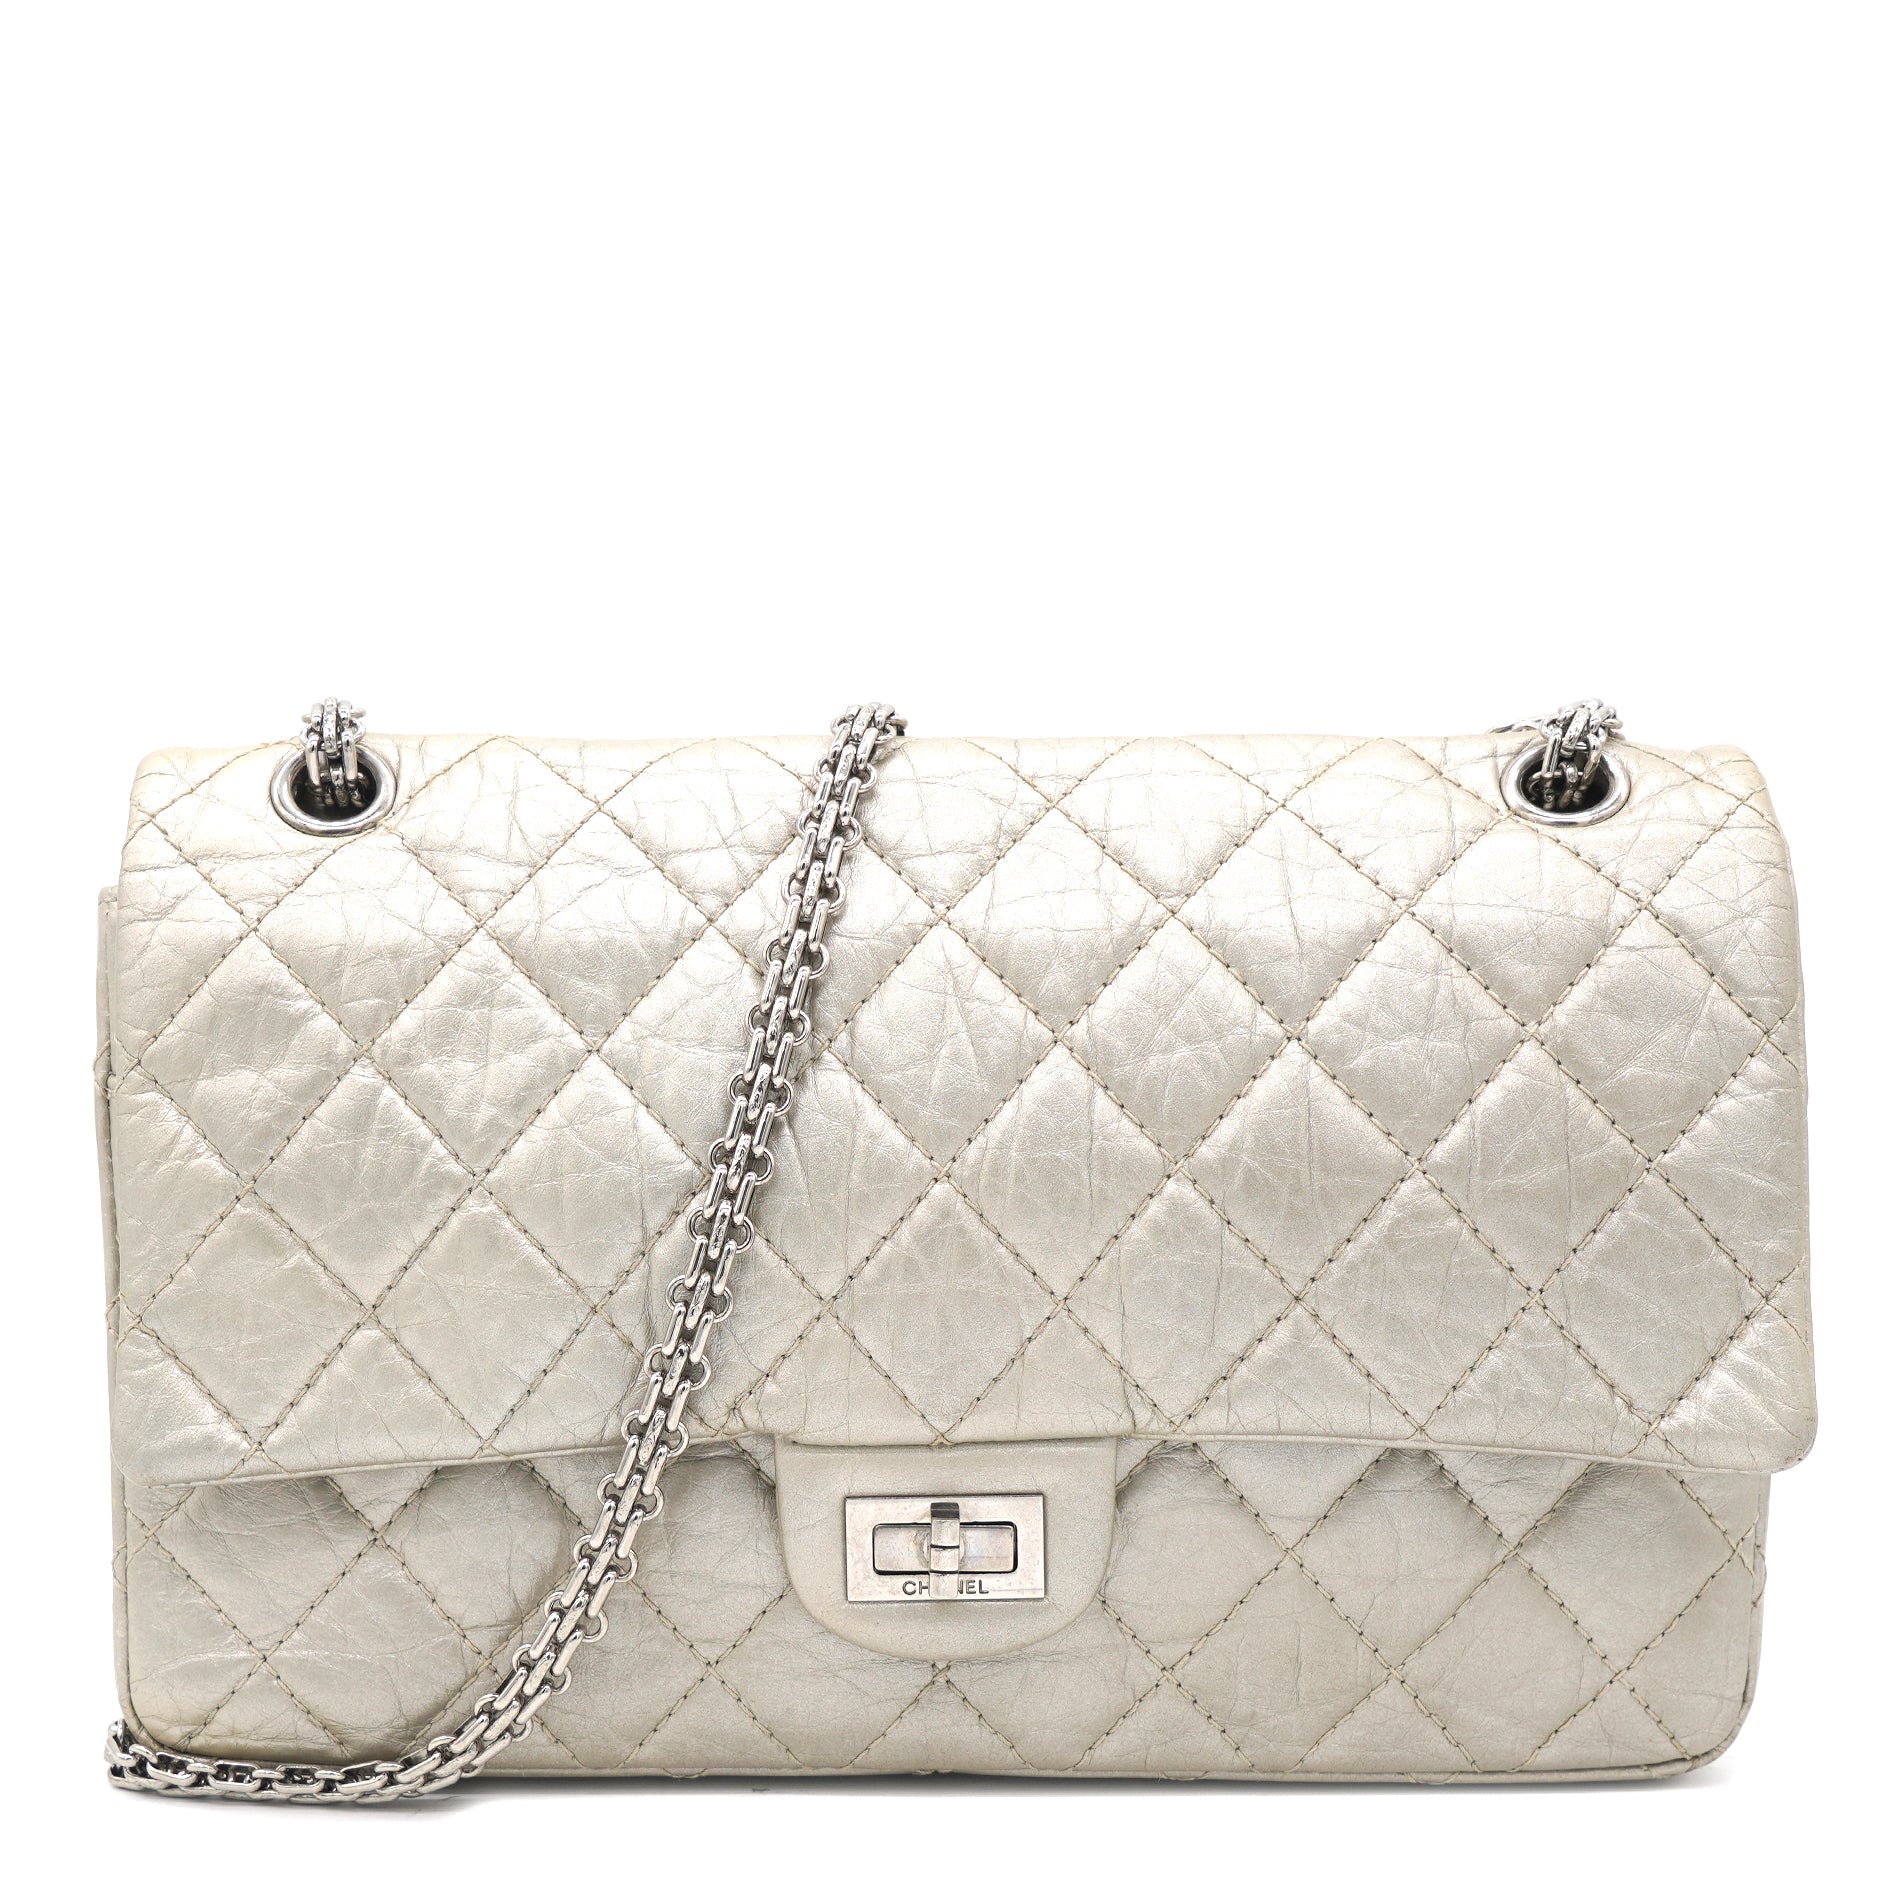 Chanel Limited Edition Charms 255 Reissue Classic Flap Bag 225 AWL15   LuxuryPromise